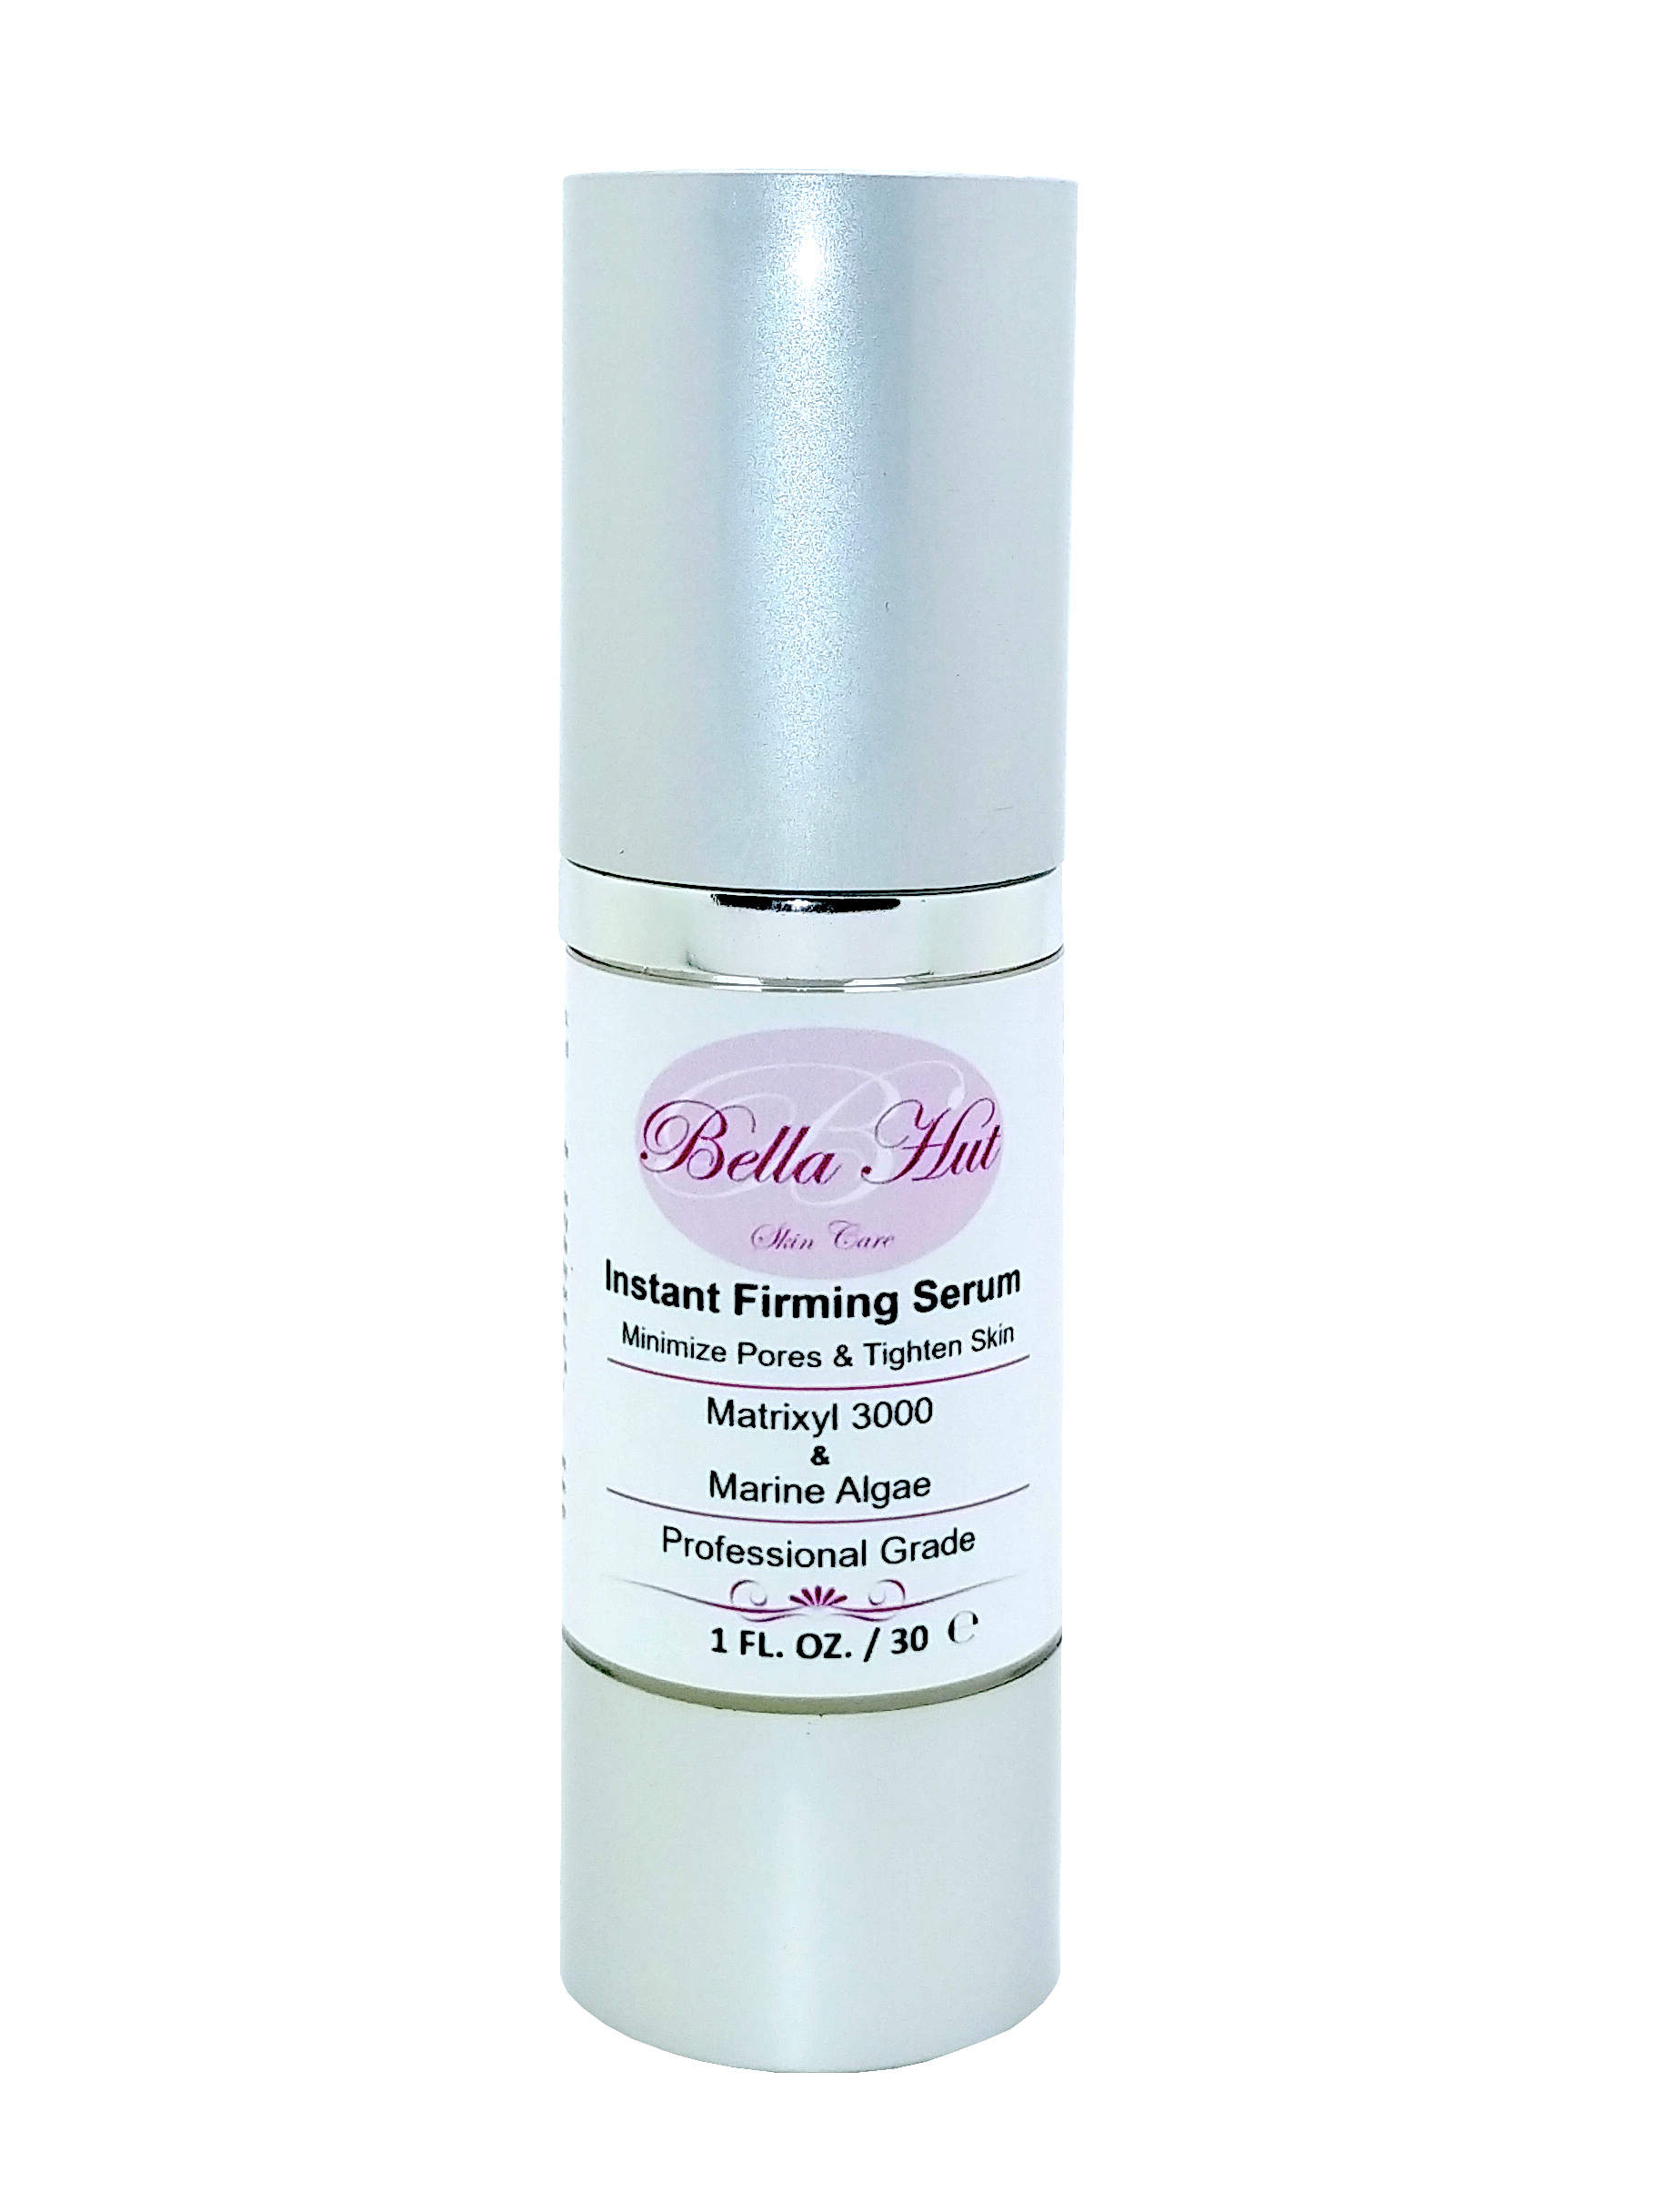 Anti Aging Serum with Matrixyl 3000 And Algae reduces wrinkles, fine lines and minimizes pores